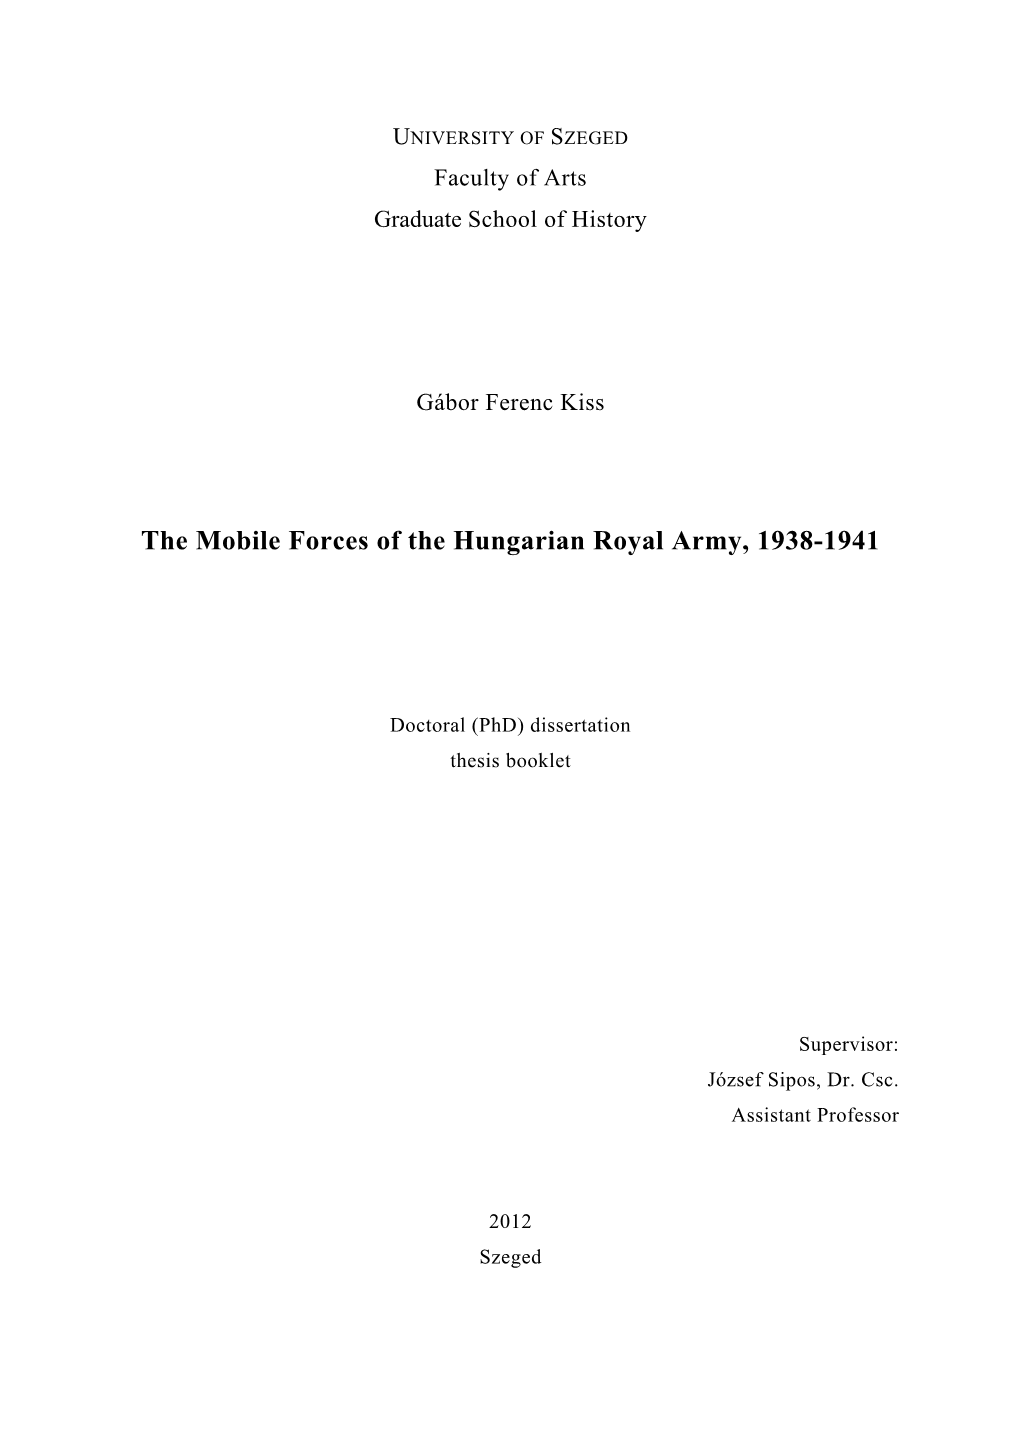 The Mobile Forces of the Hungarian Royal Army, 1938-1941